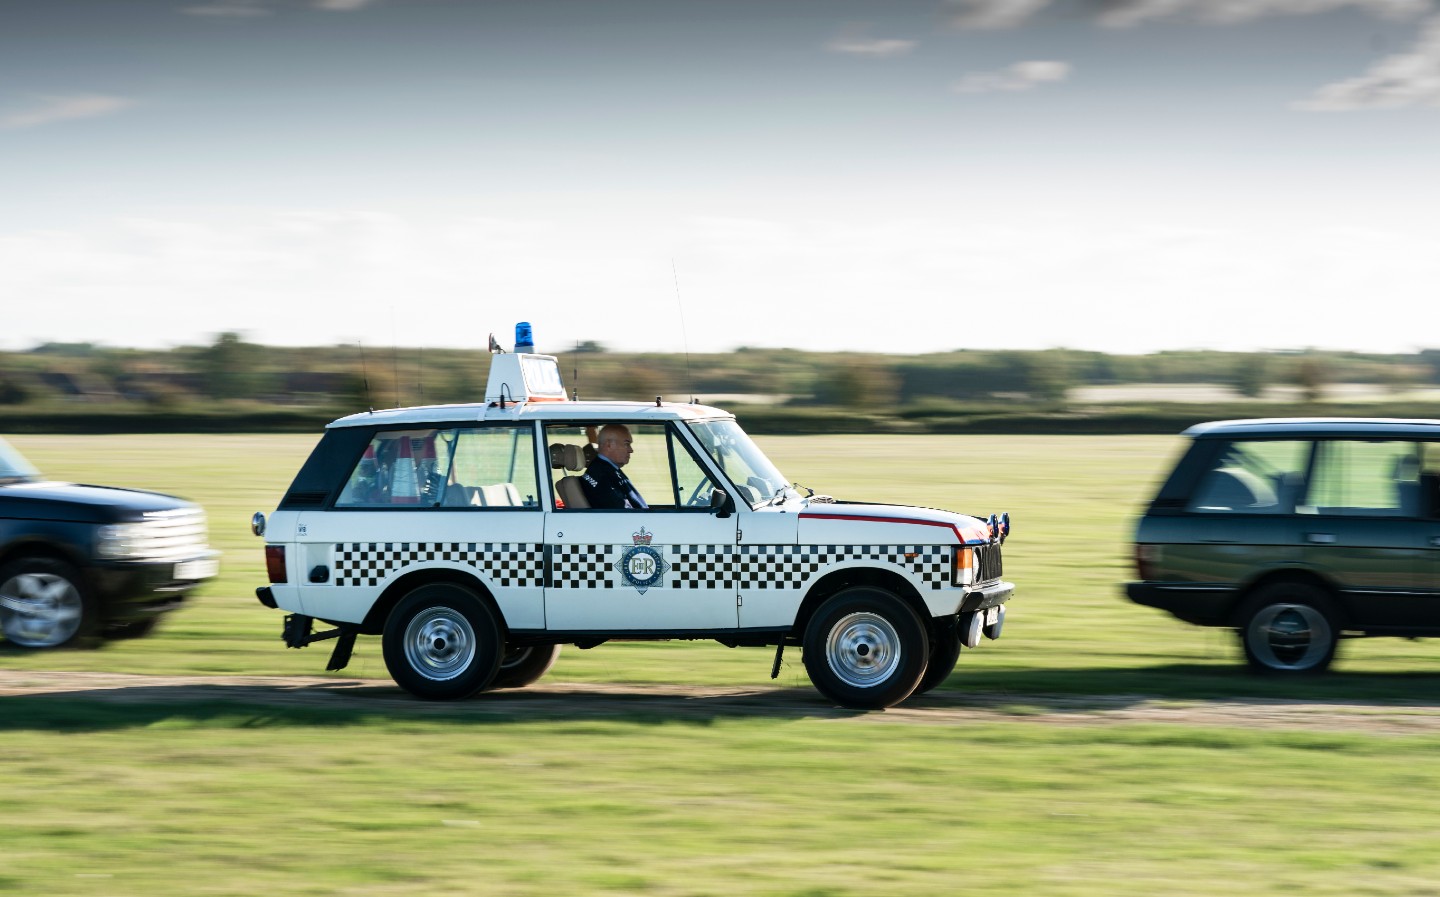 Range Rover fiftieth anniversary: From a Royal Rangie to one bought by a member of Queen, meet the star cars and their owners - Geoff Taylor's Police Range Rover